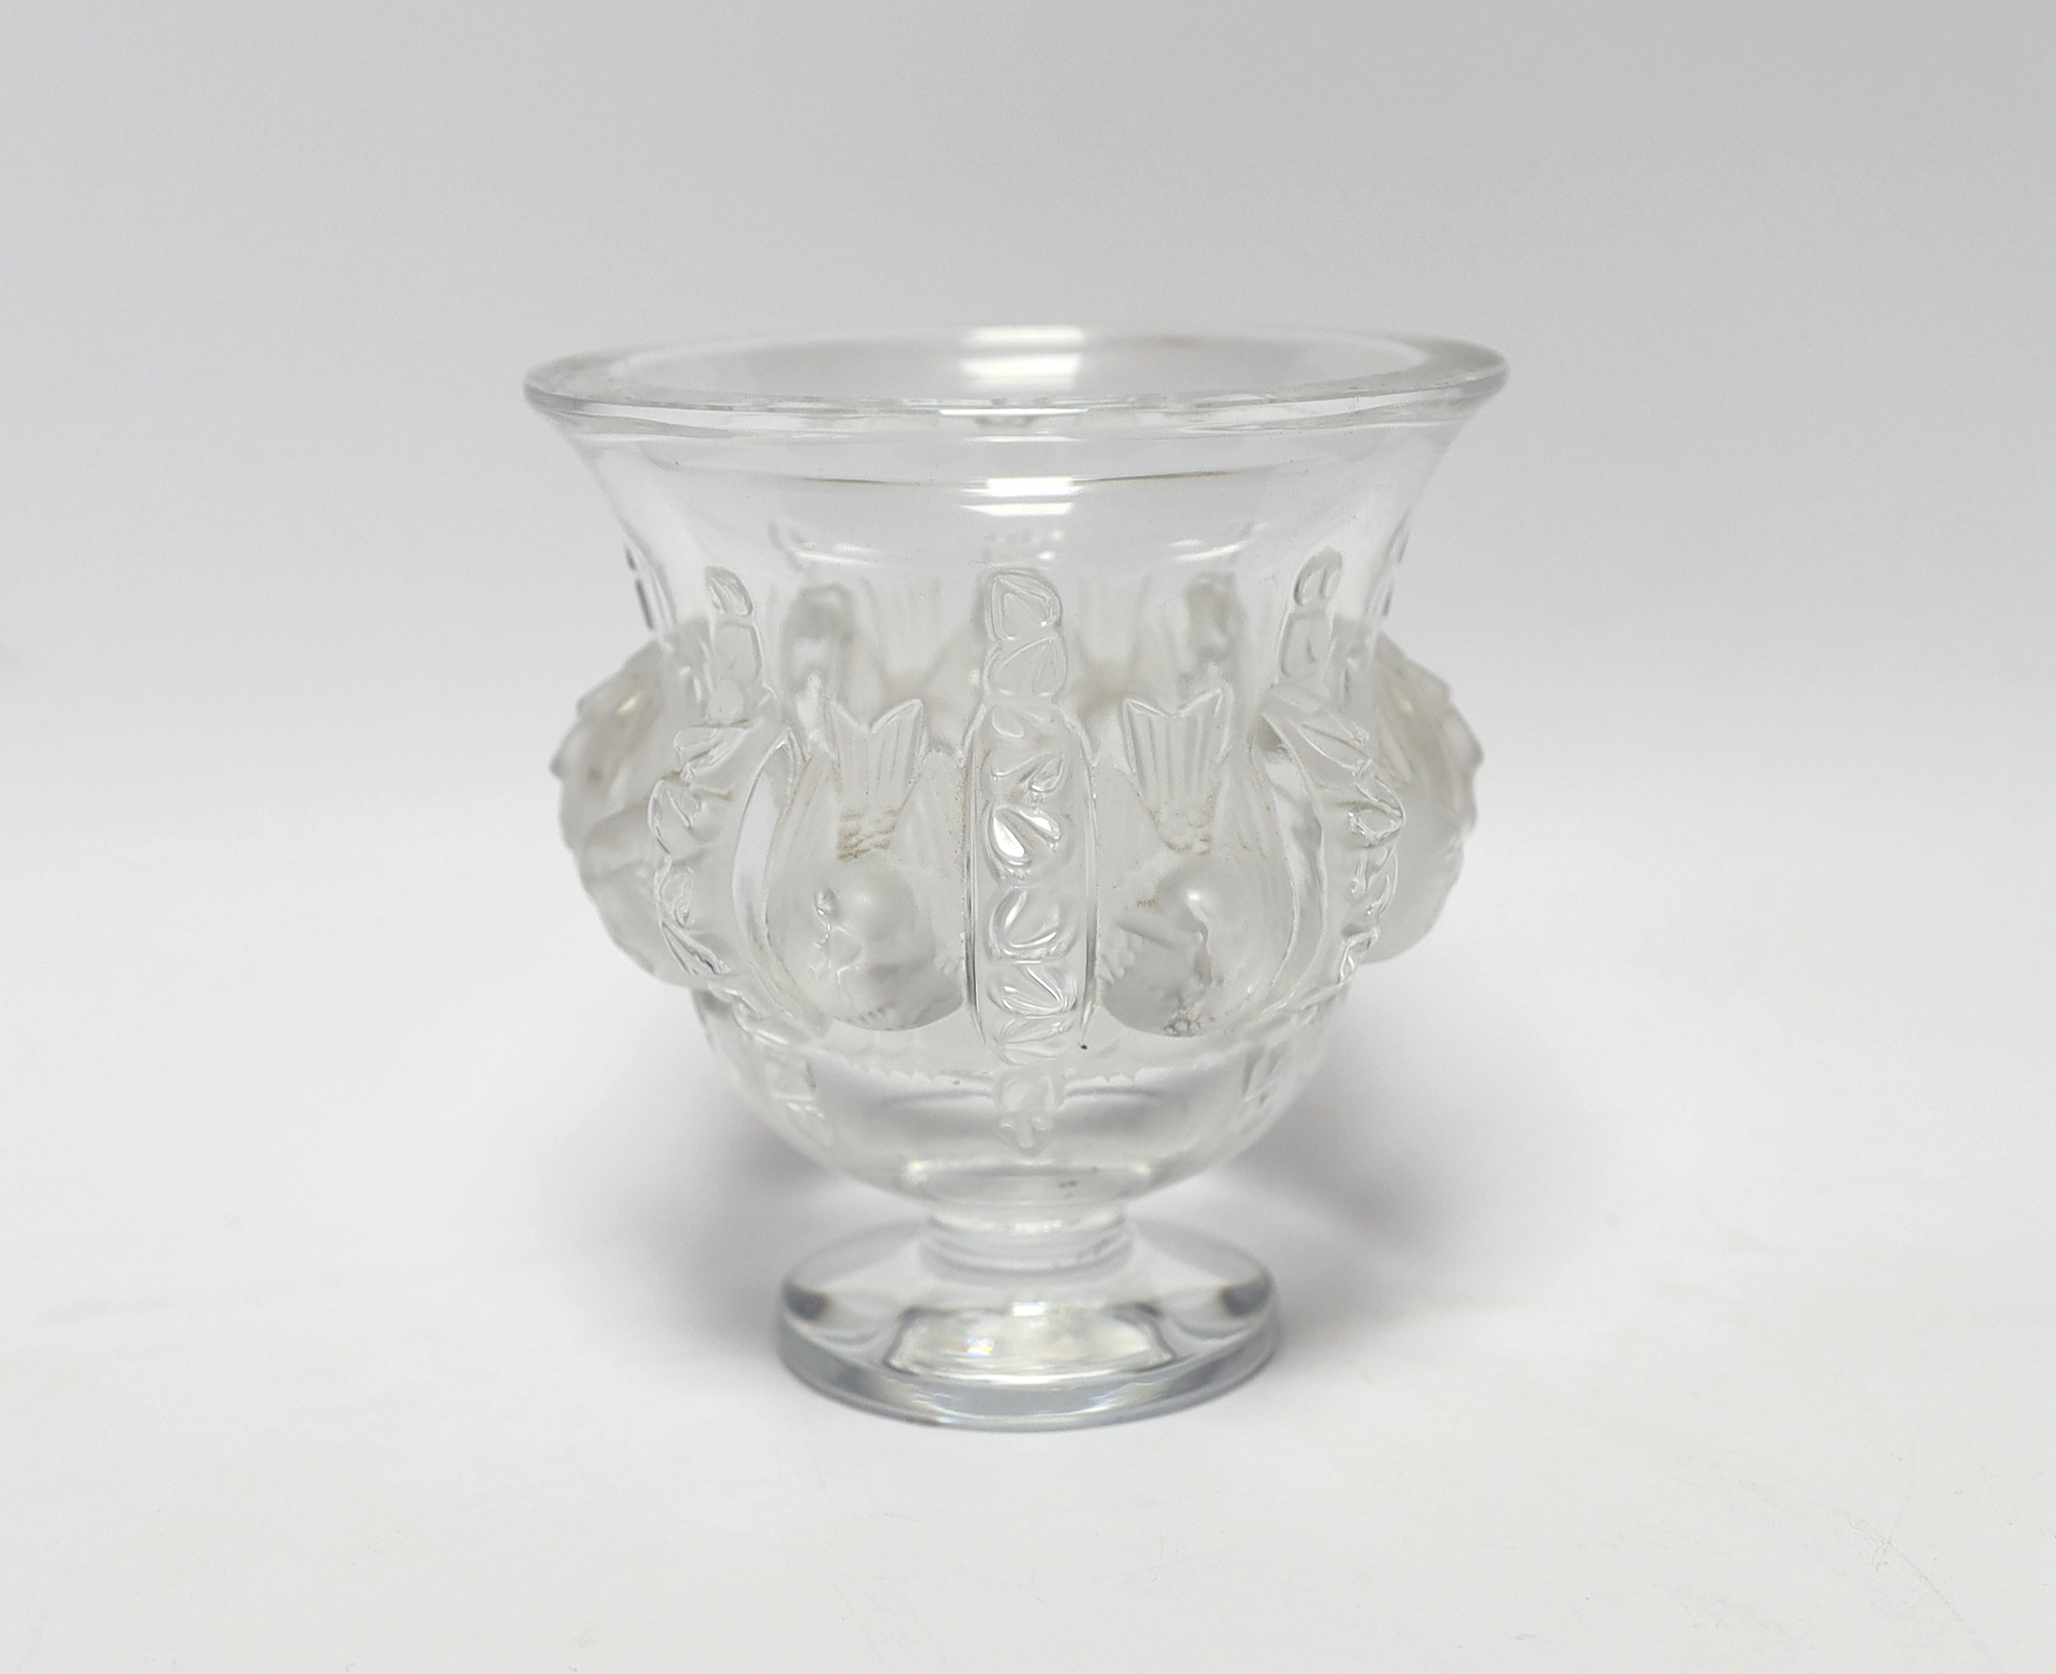 A later 20th century Lalique glass pedestal vase decorated in the Dampierre pattern, engraved